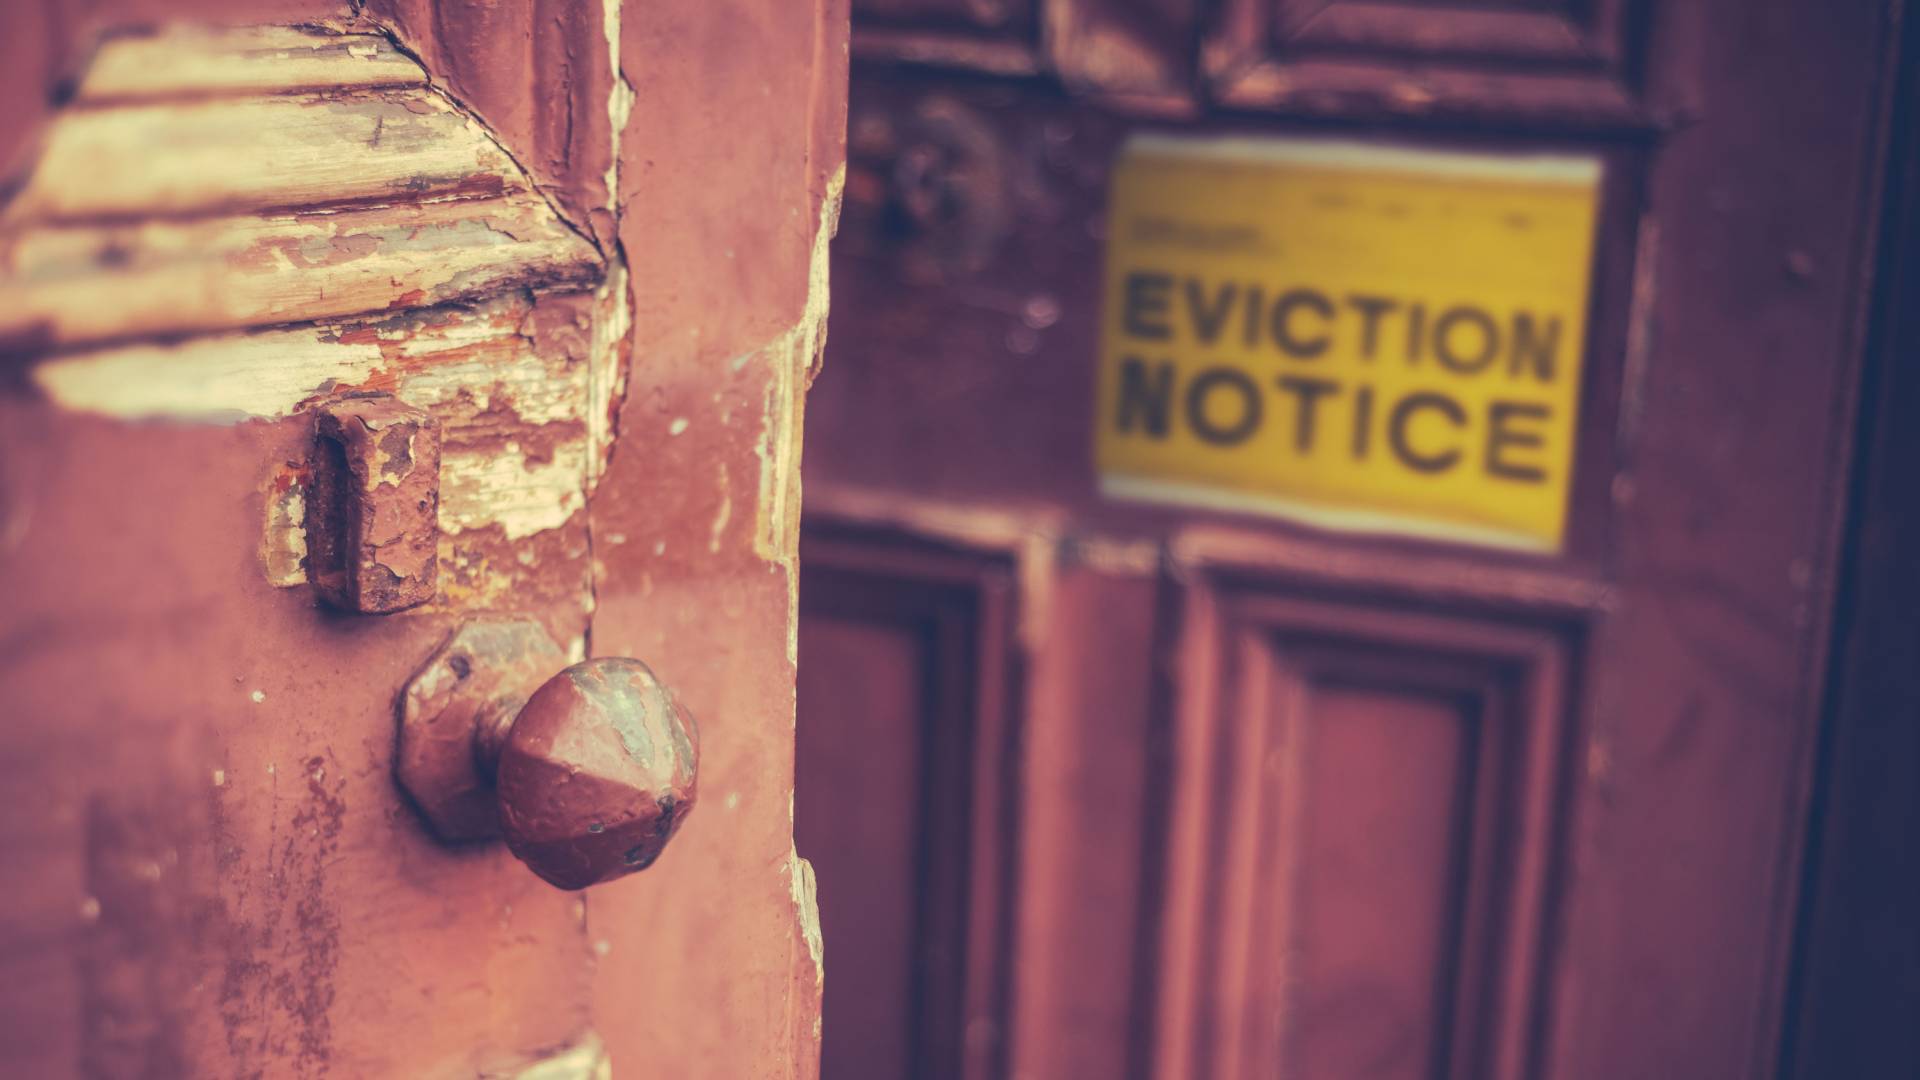 An eviction notice in a door with chipped paint